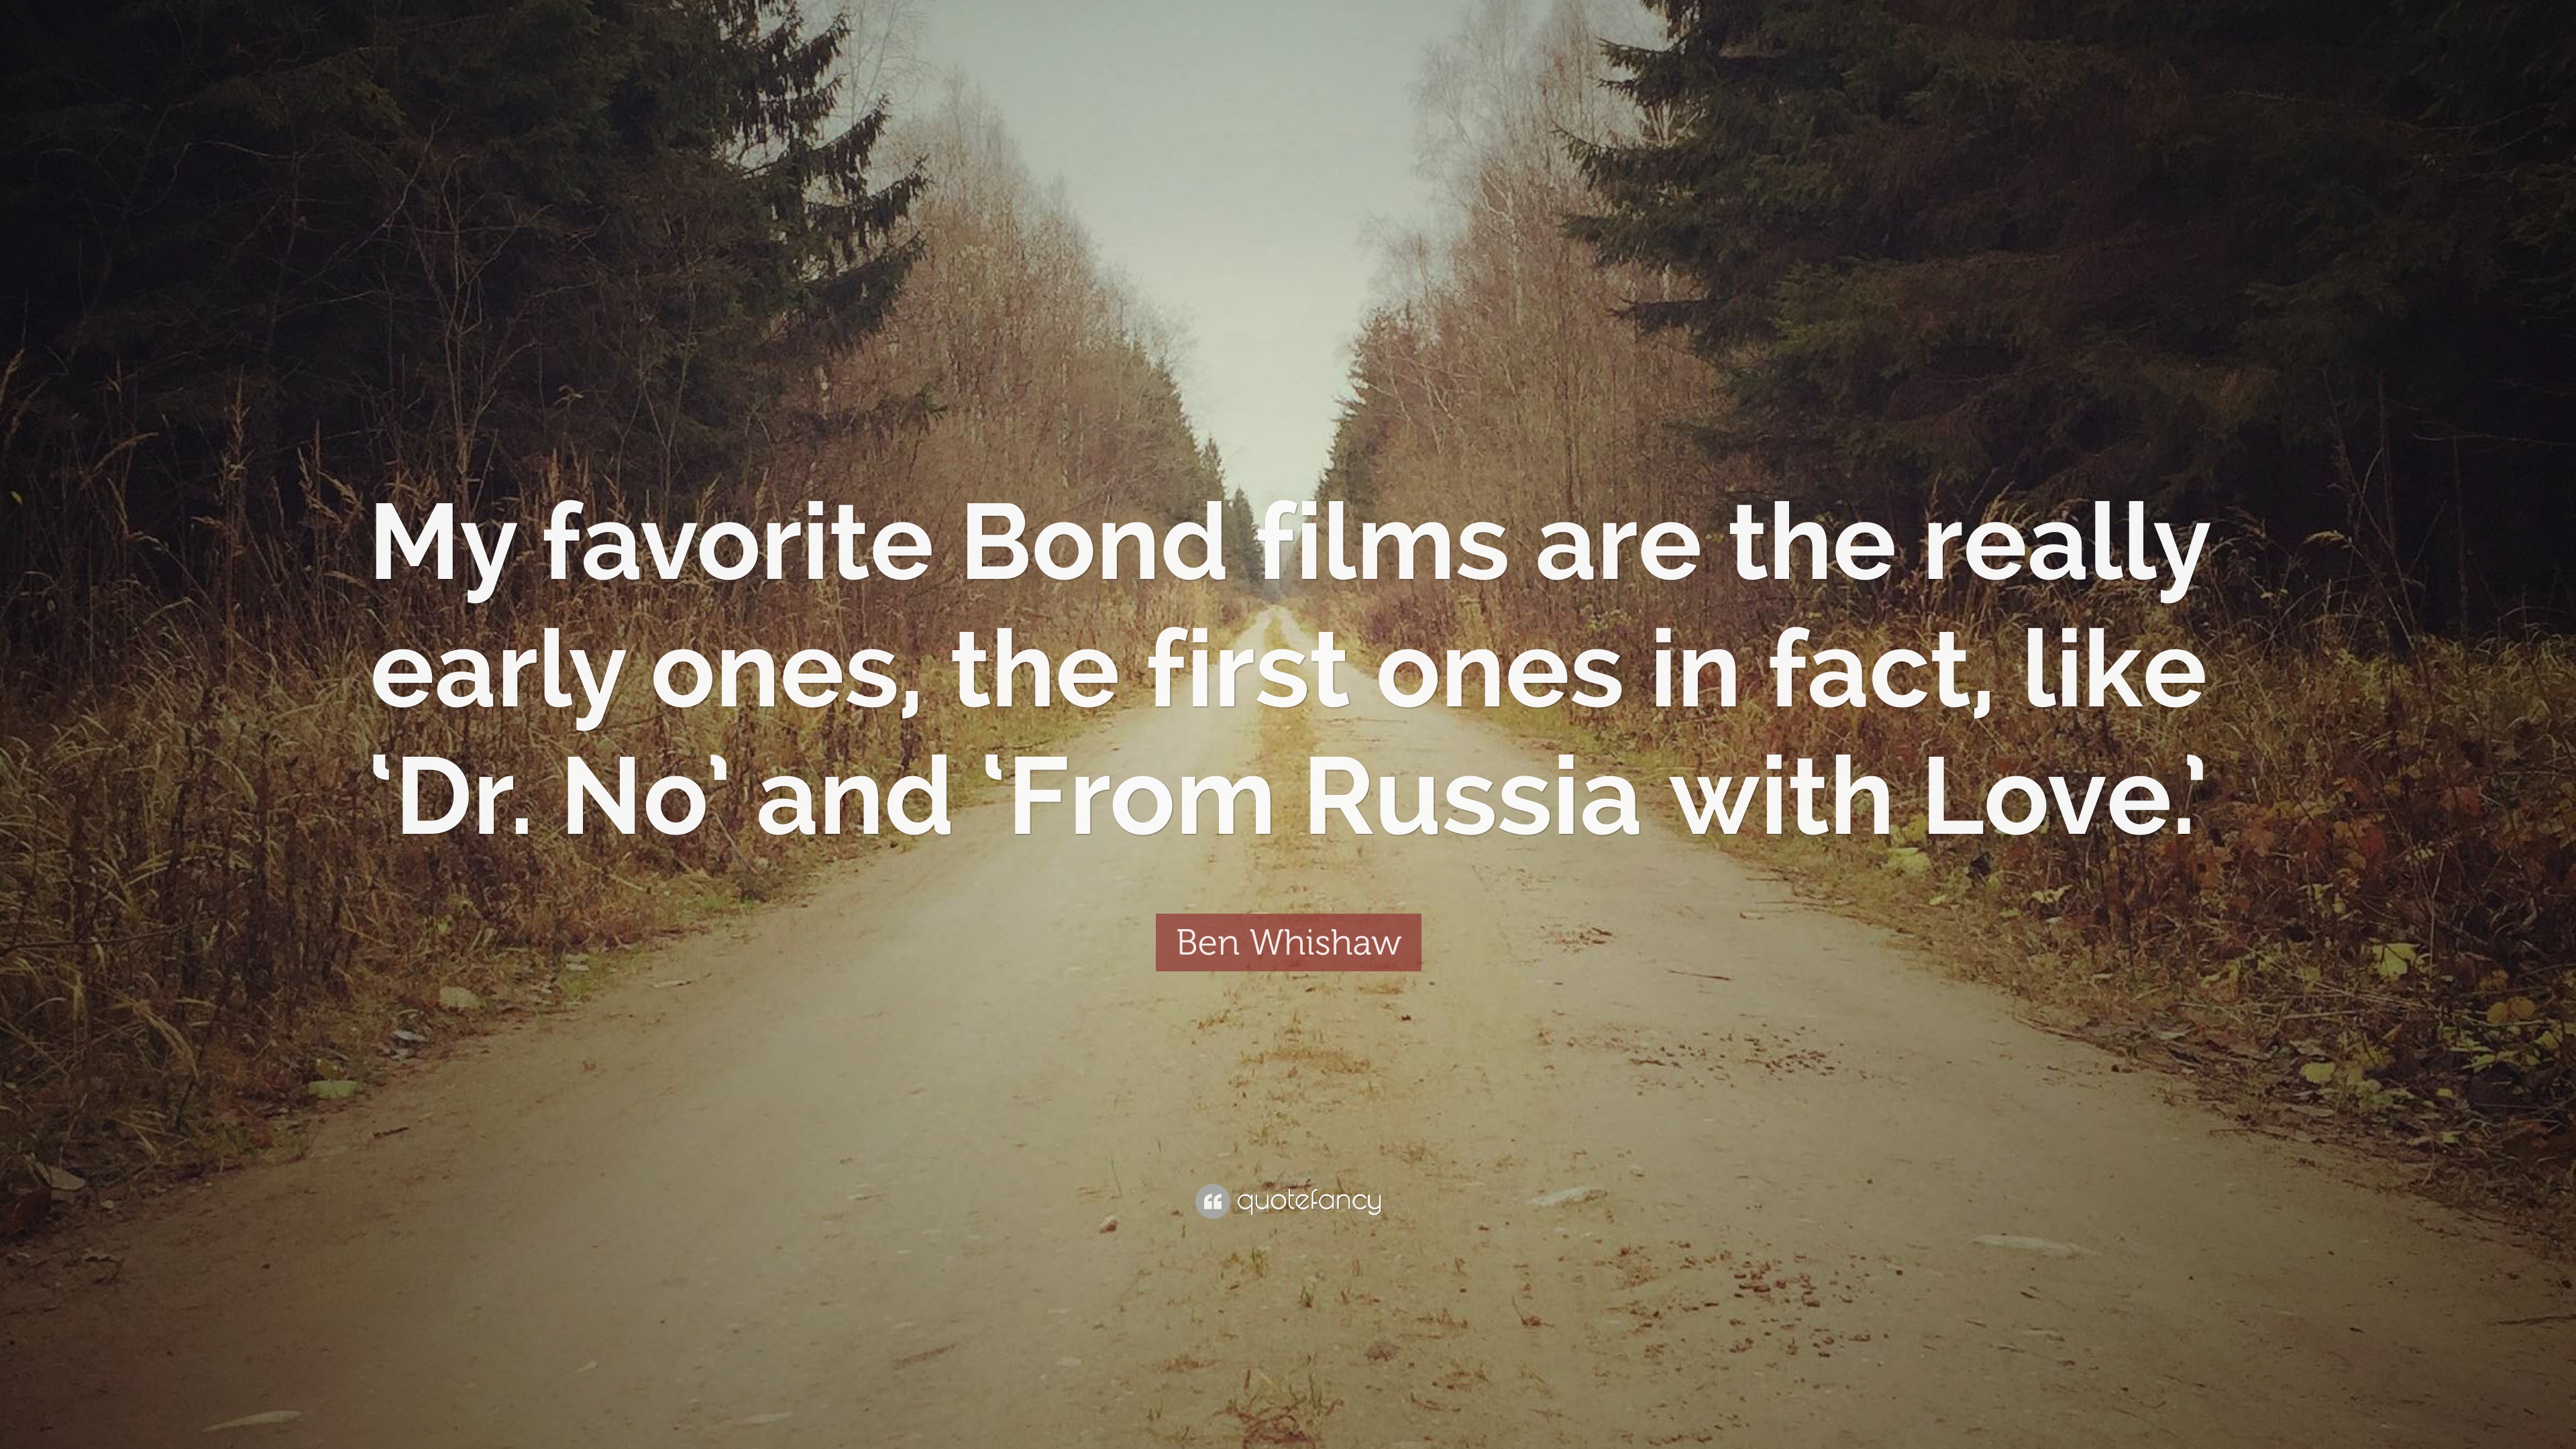 Ben Whishaw Quote: “My favorite Bond films are the really early ones